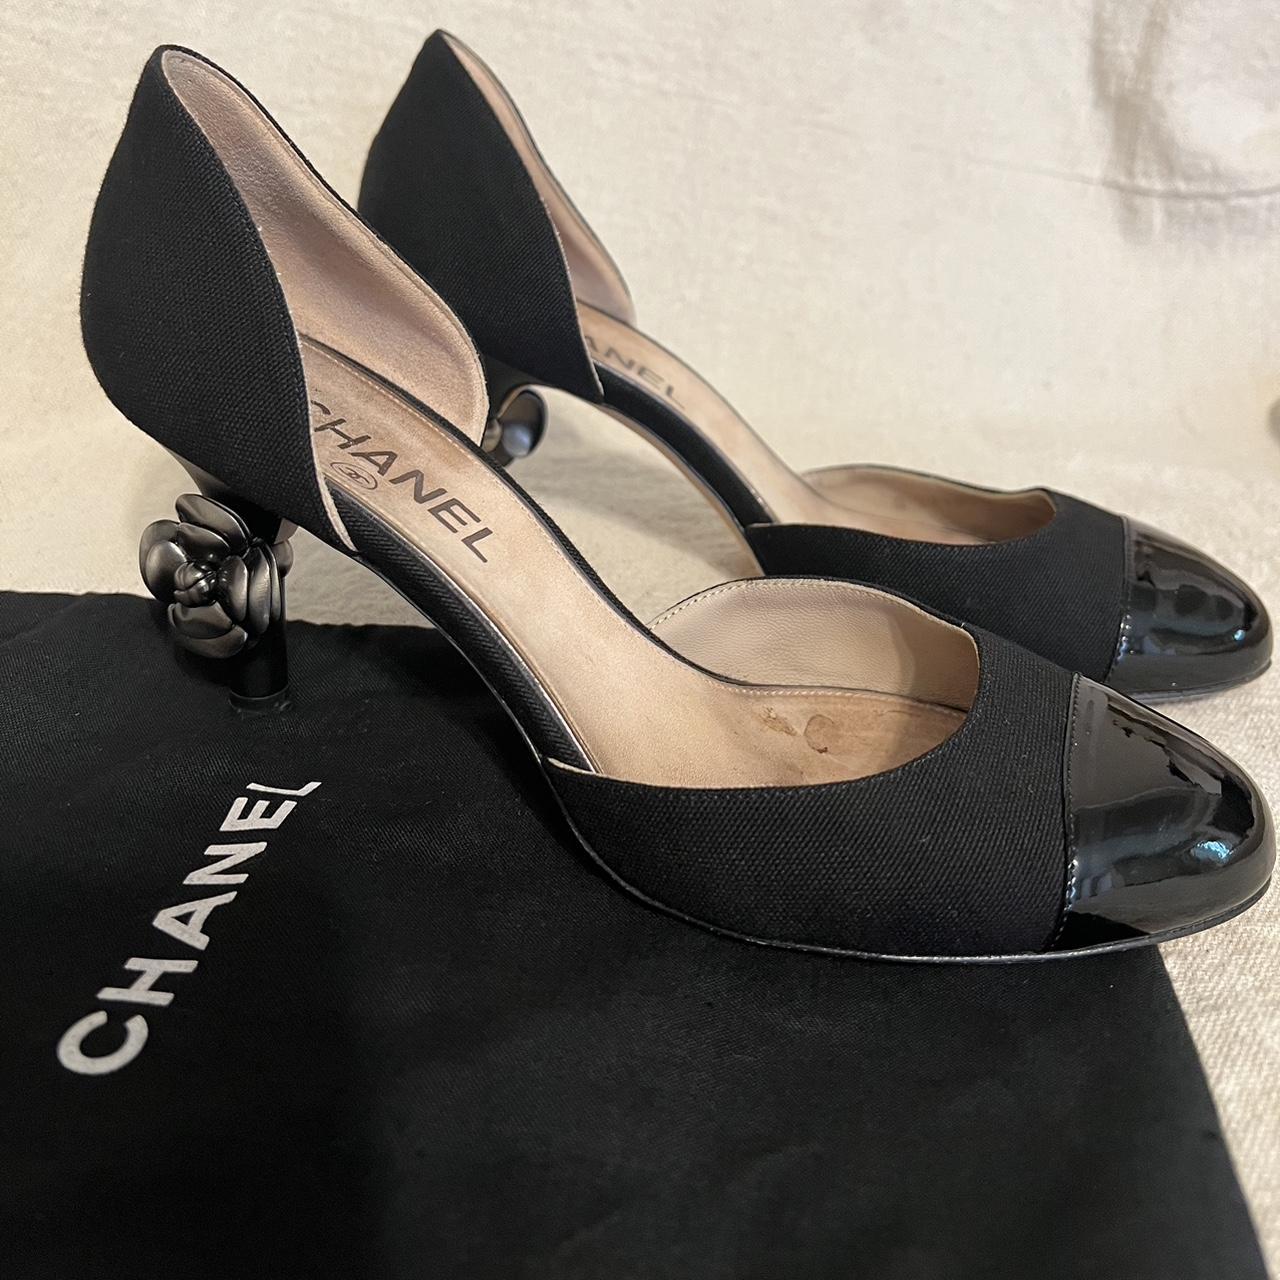 CHANEL, Shoes, Chanel Pearl Heel Pumps